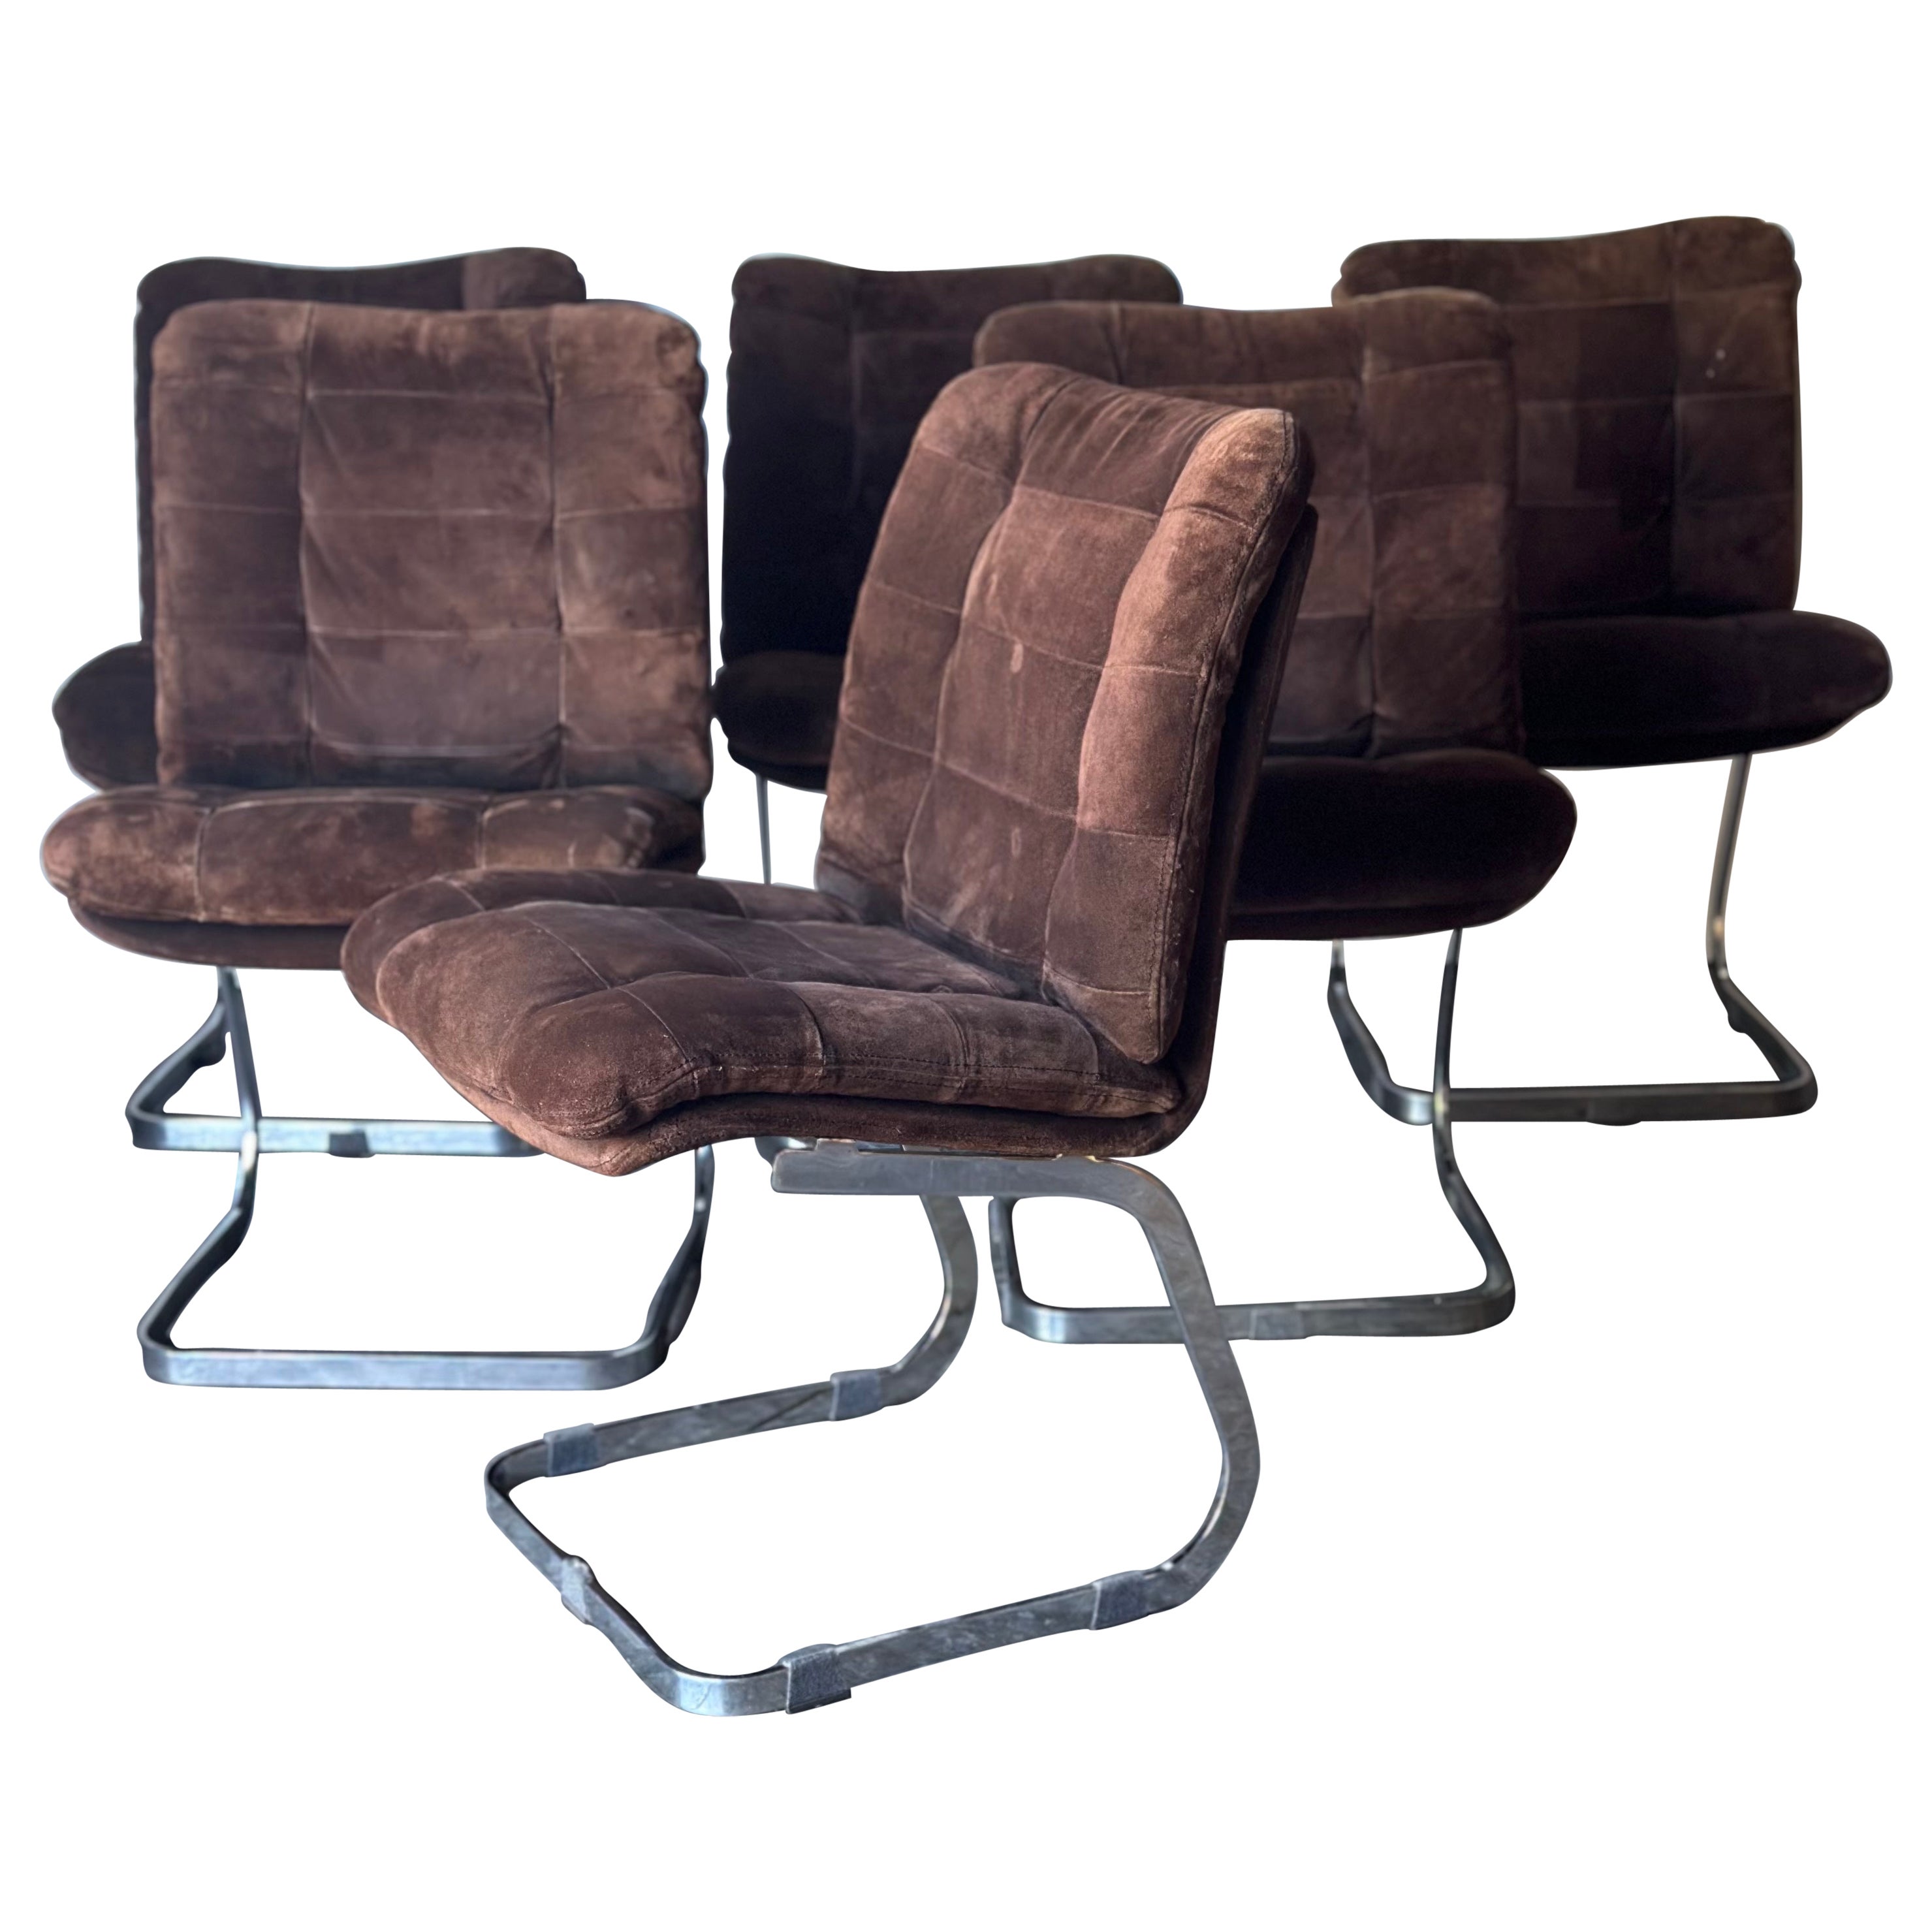 Set of 6 Suede and Chrome Roche Bobois Chairs, France c. 1970s